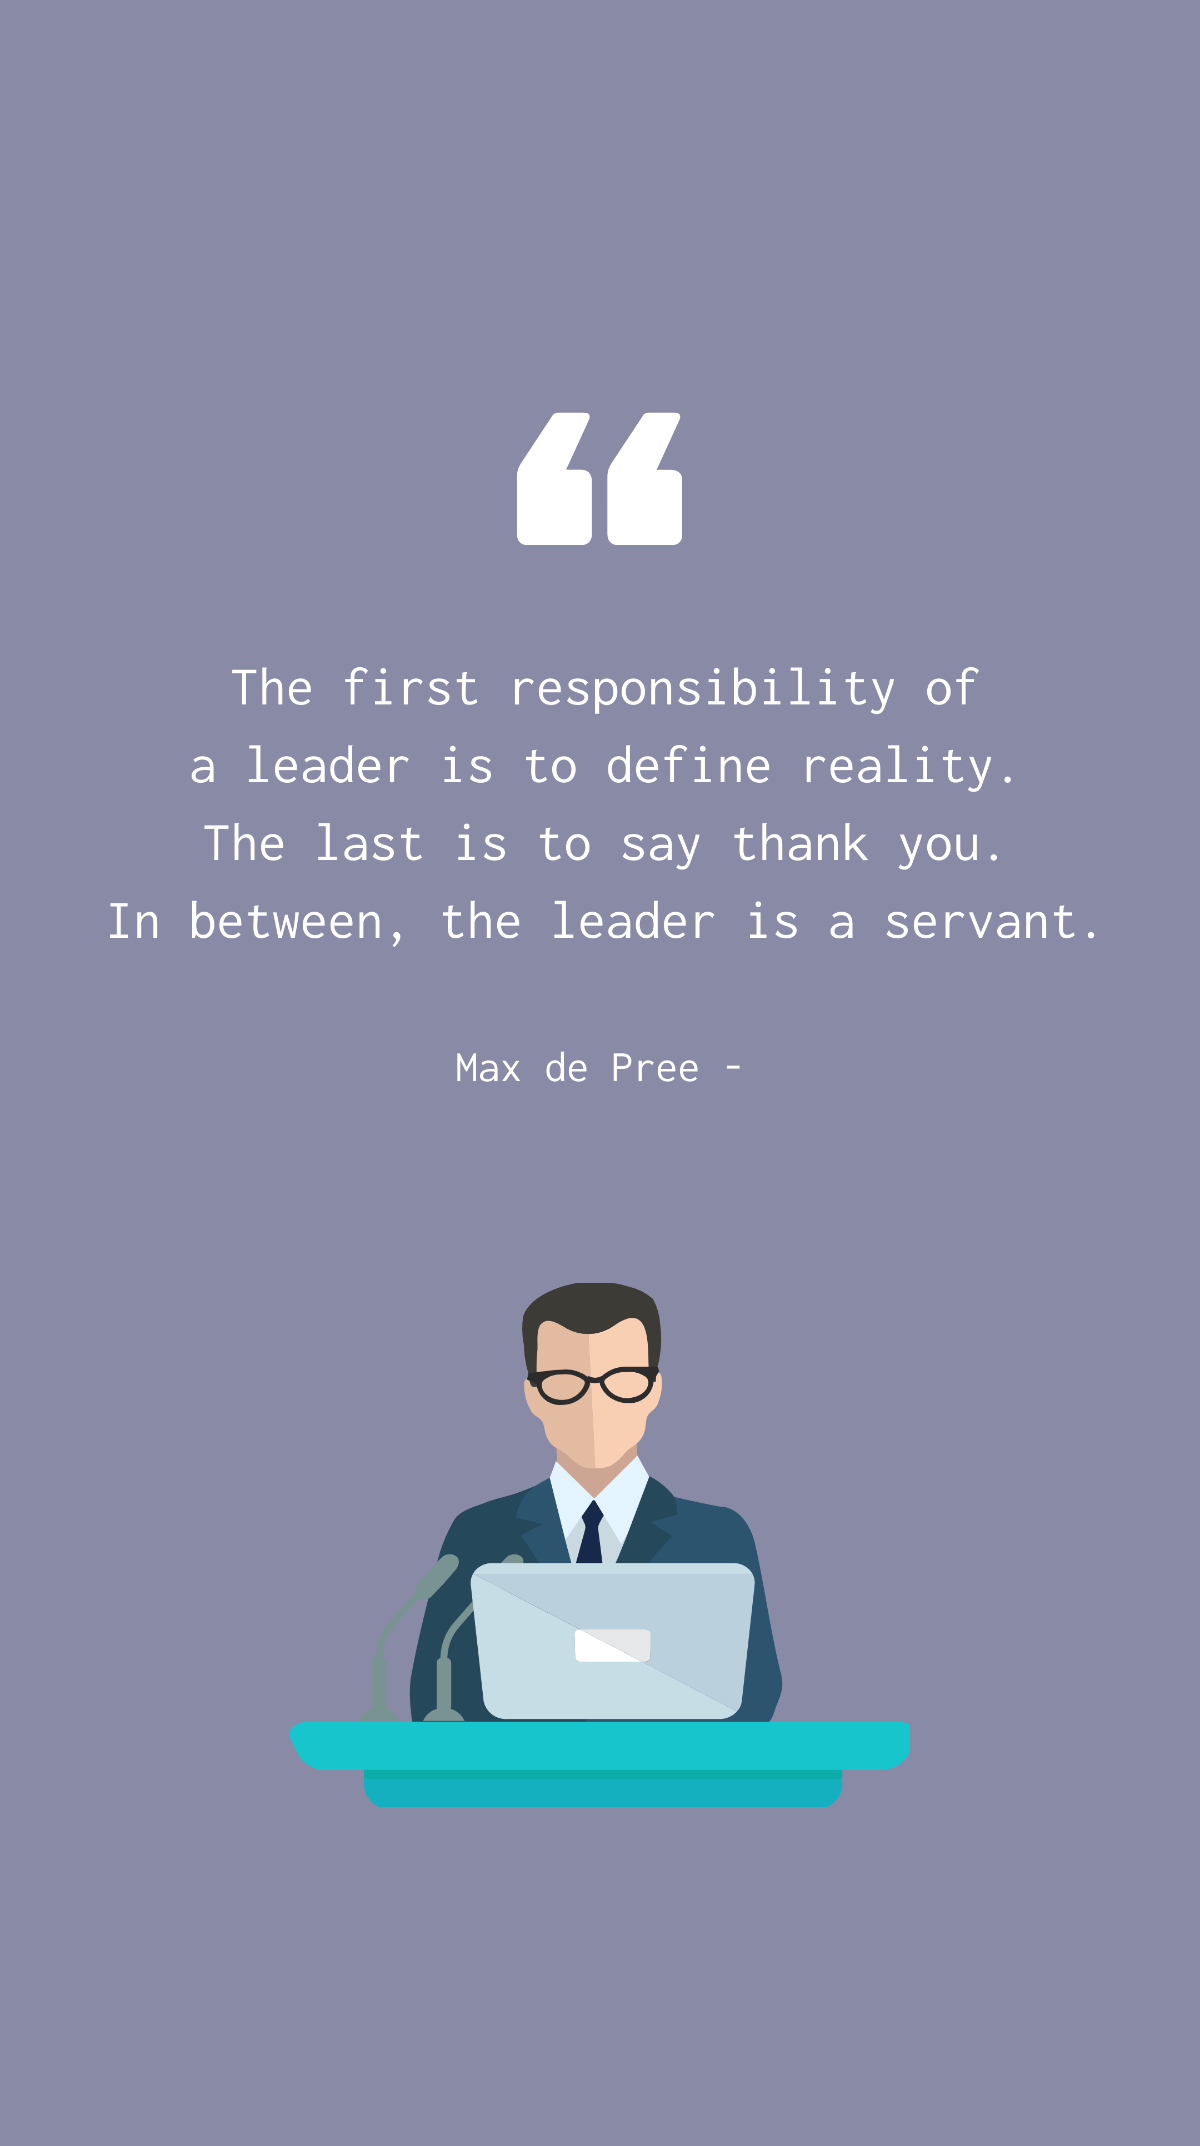 Max de Pree - The first responsibility of a leader is to define reality. The last is to say thank you. In between, the leader is a servant. Template